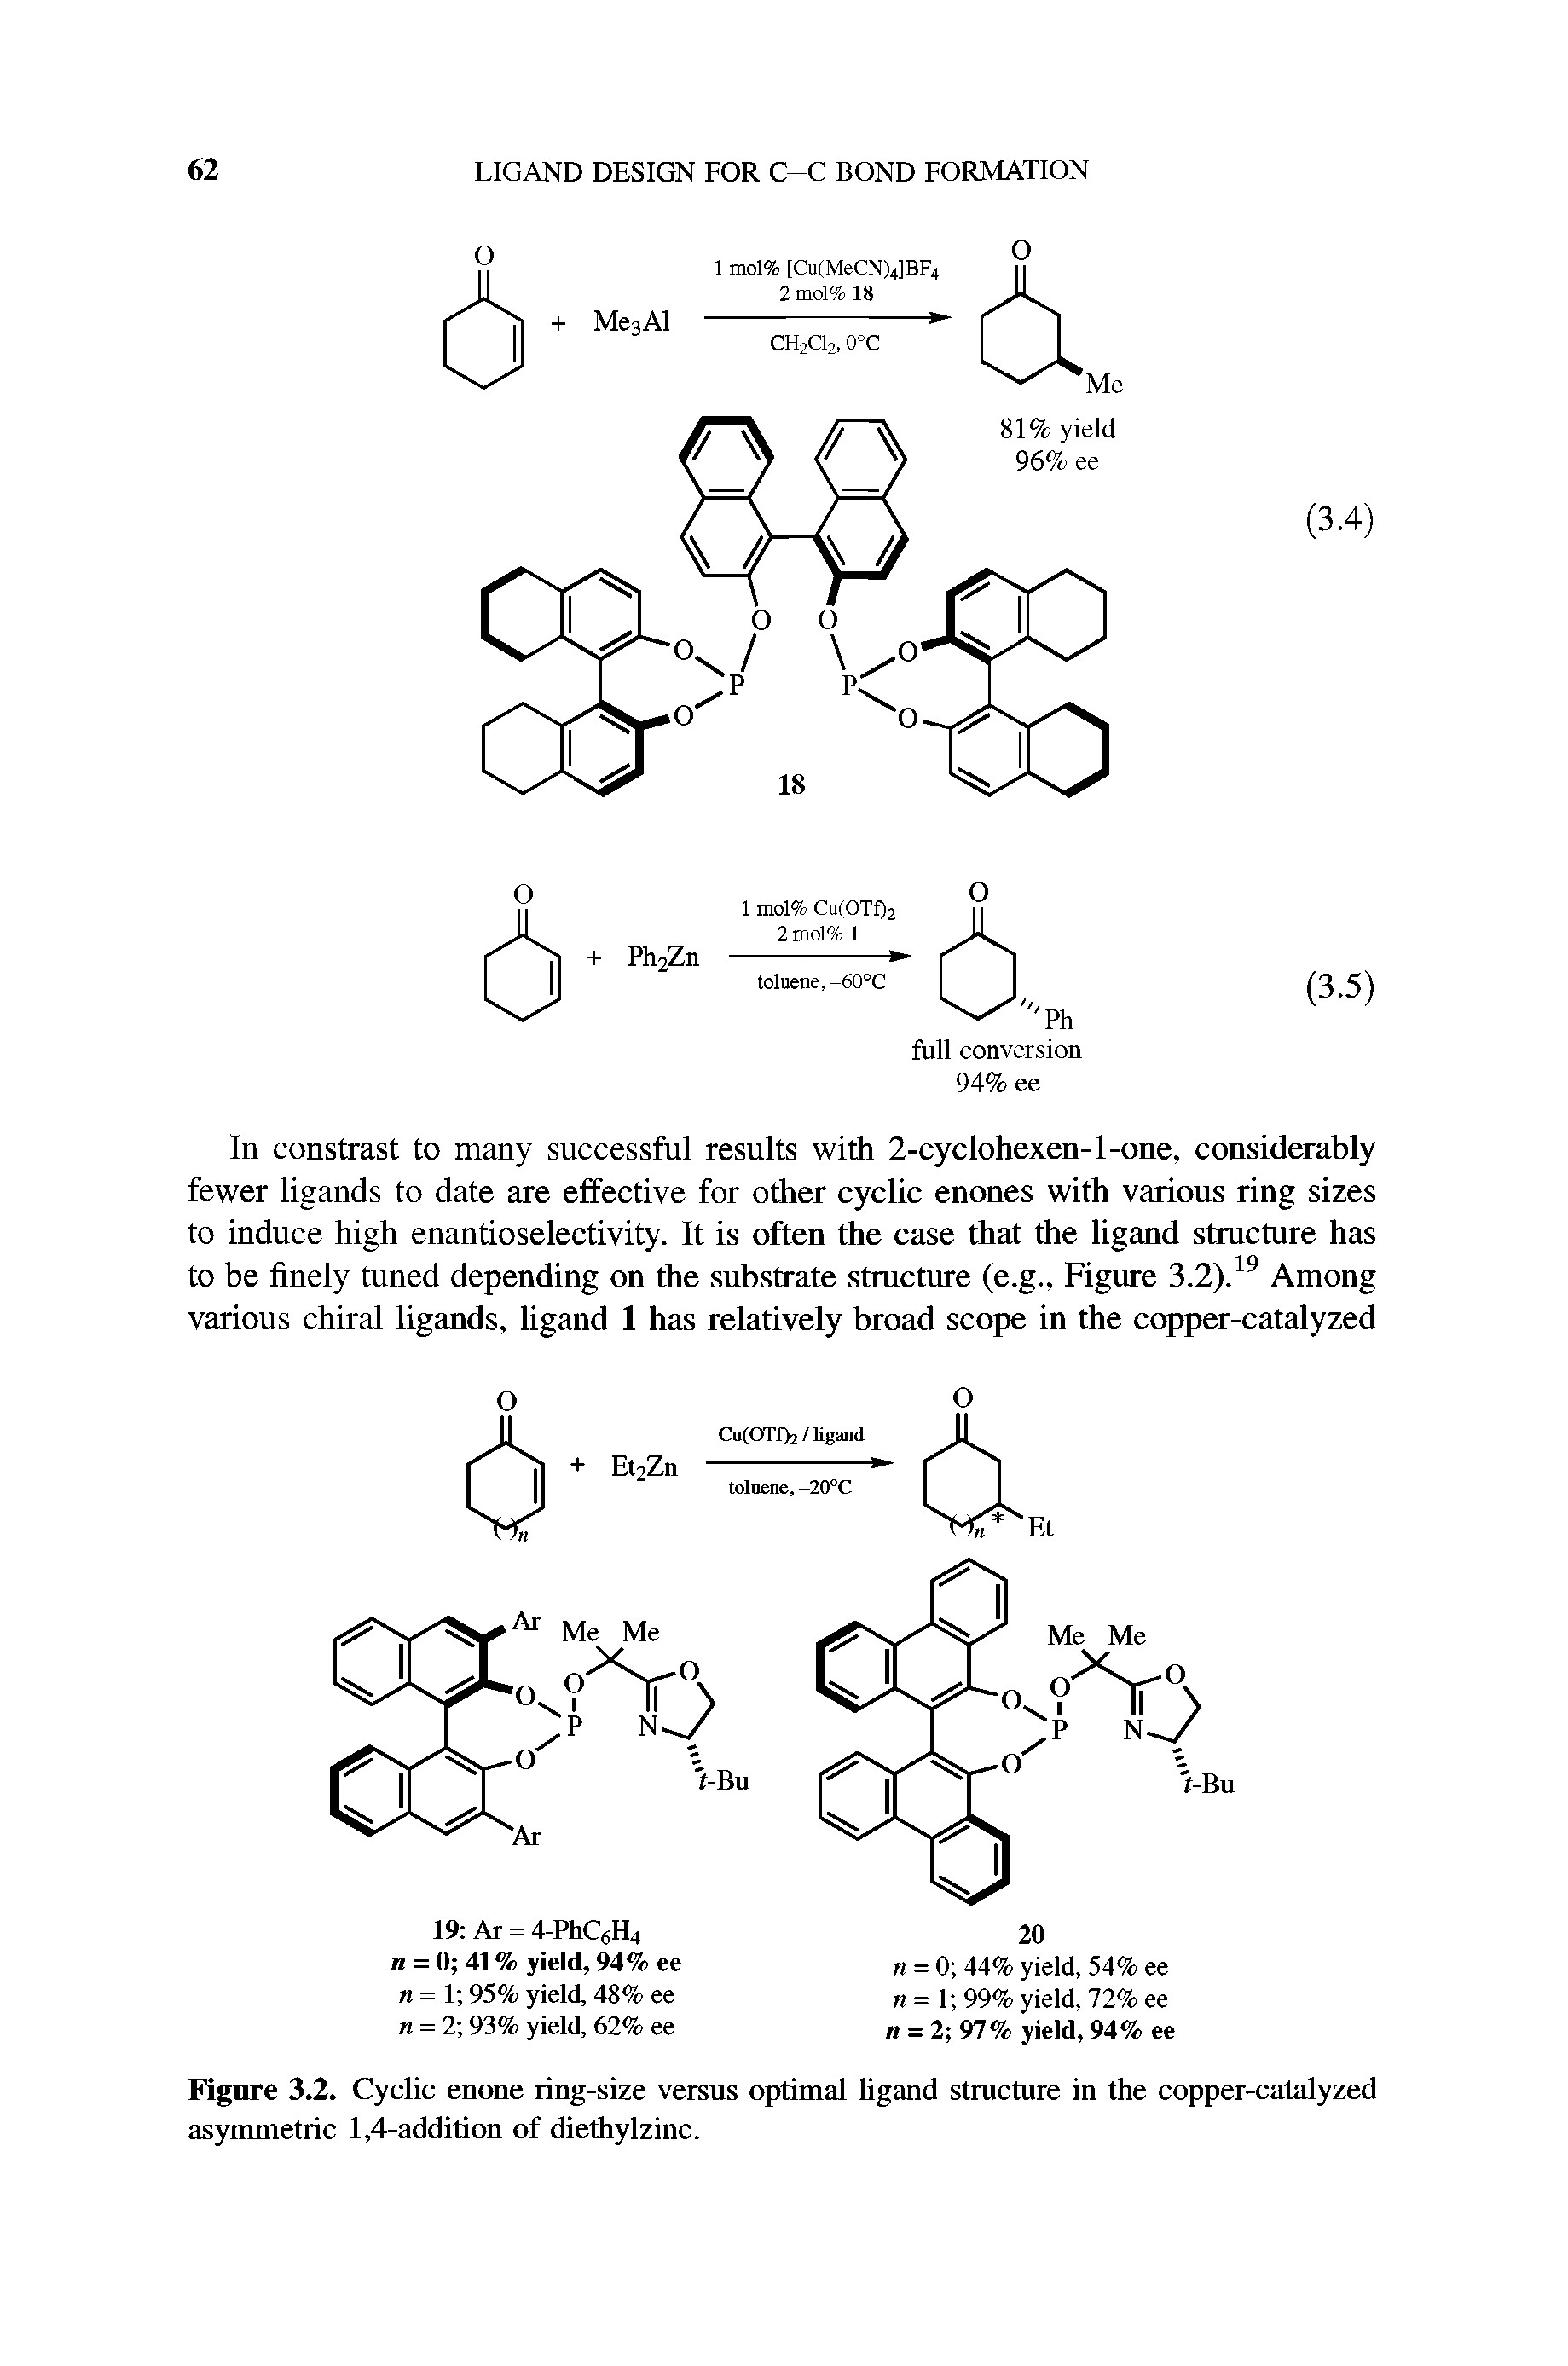 Figure 3.2. Cyclic enone ring-size versus optimal ligand structure in the copper-catalyzed asymunetric 1,4-addition of diethylzinc.